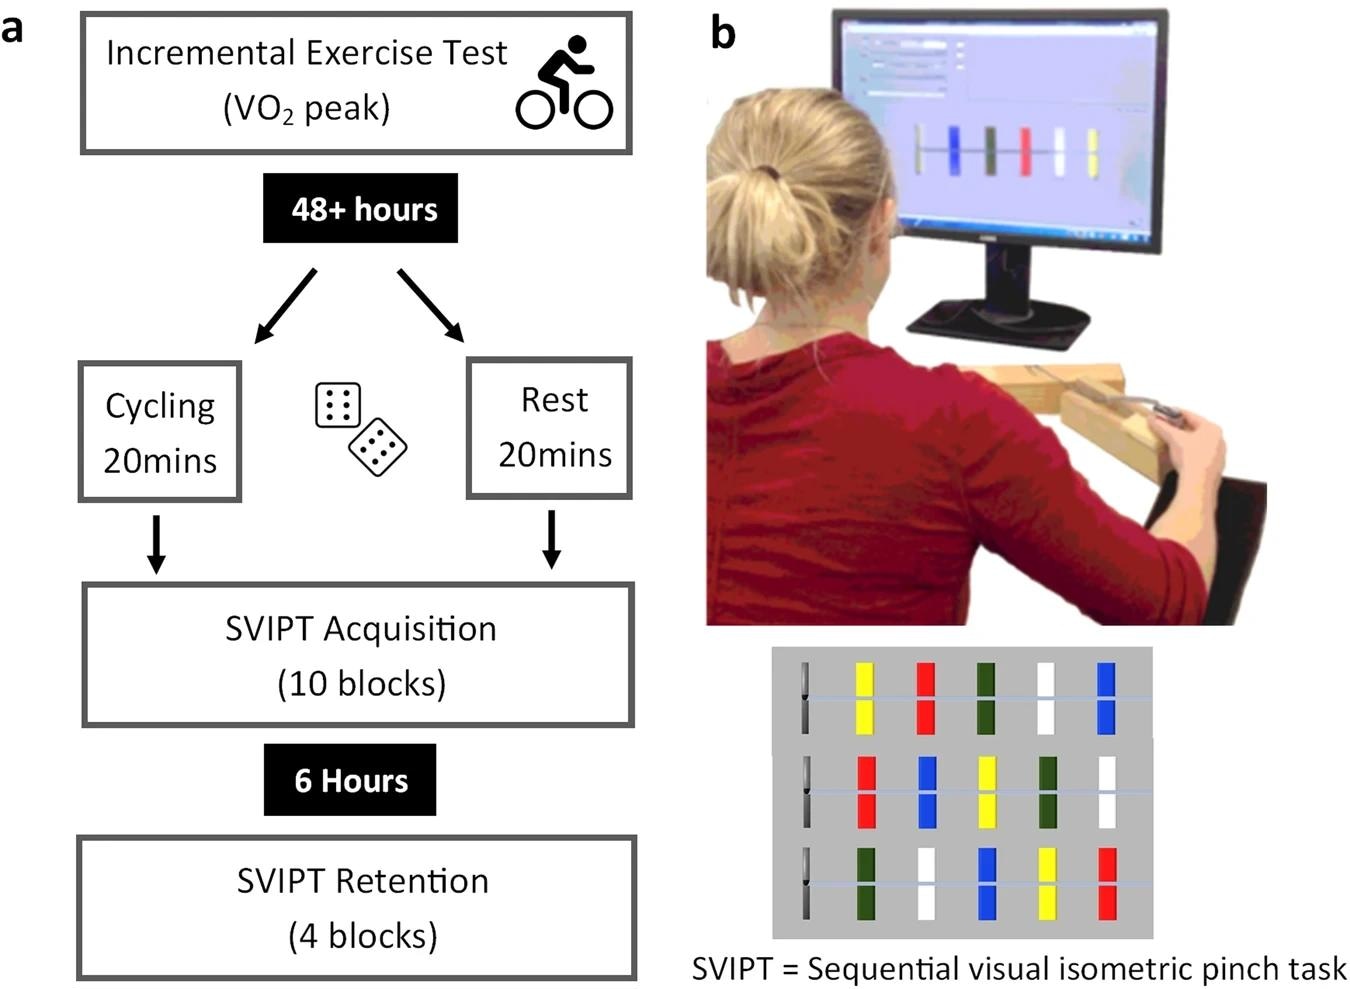 a Overview of testing schedule. An incremental exercise test was conducted at least 48 hours before subsequent testing. Participants were randomised into Rest or Exercise conditions. Acquisition and retention of the motor task were completed on the same day with a 6 ± 1-hour delay between testing. b Depiction of SVIPT motor task adapted from Stavrinos & Coxon. In this version of the SVIPT, three motor sequences are presented in a pseudorandom order within each block of 12 trials. This is a more cognitively challenging version of the SVIPT that requires the trial-to-trial recall, planning, execution, and learning of multiple sequences.